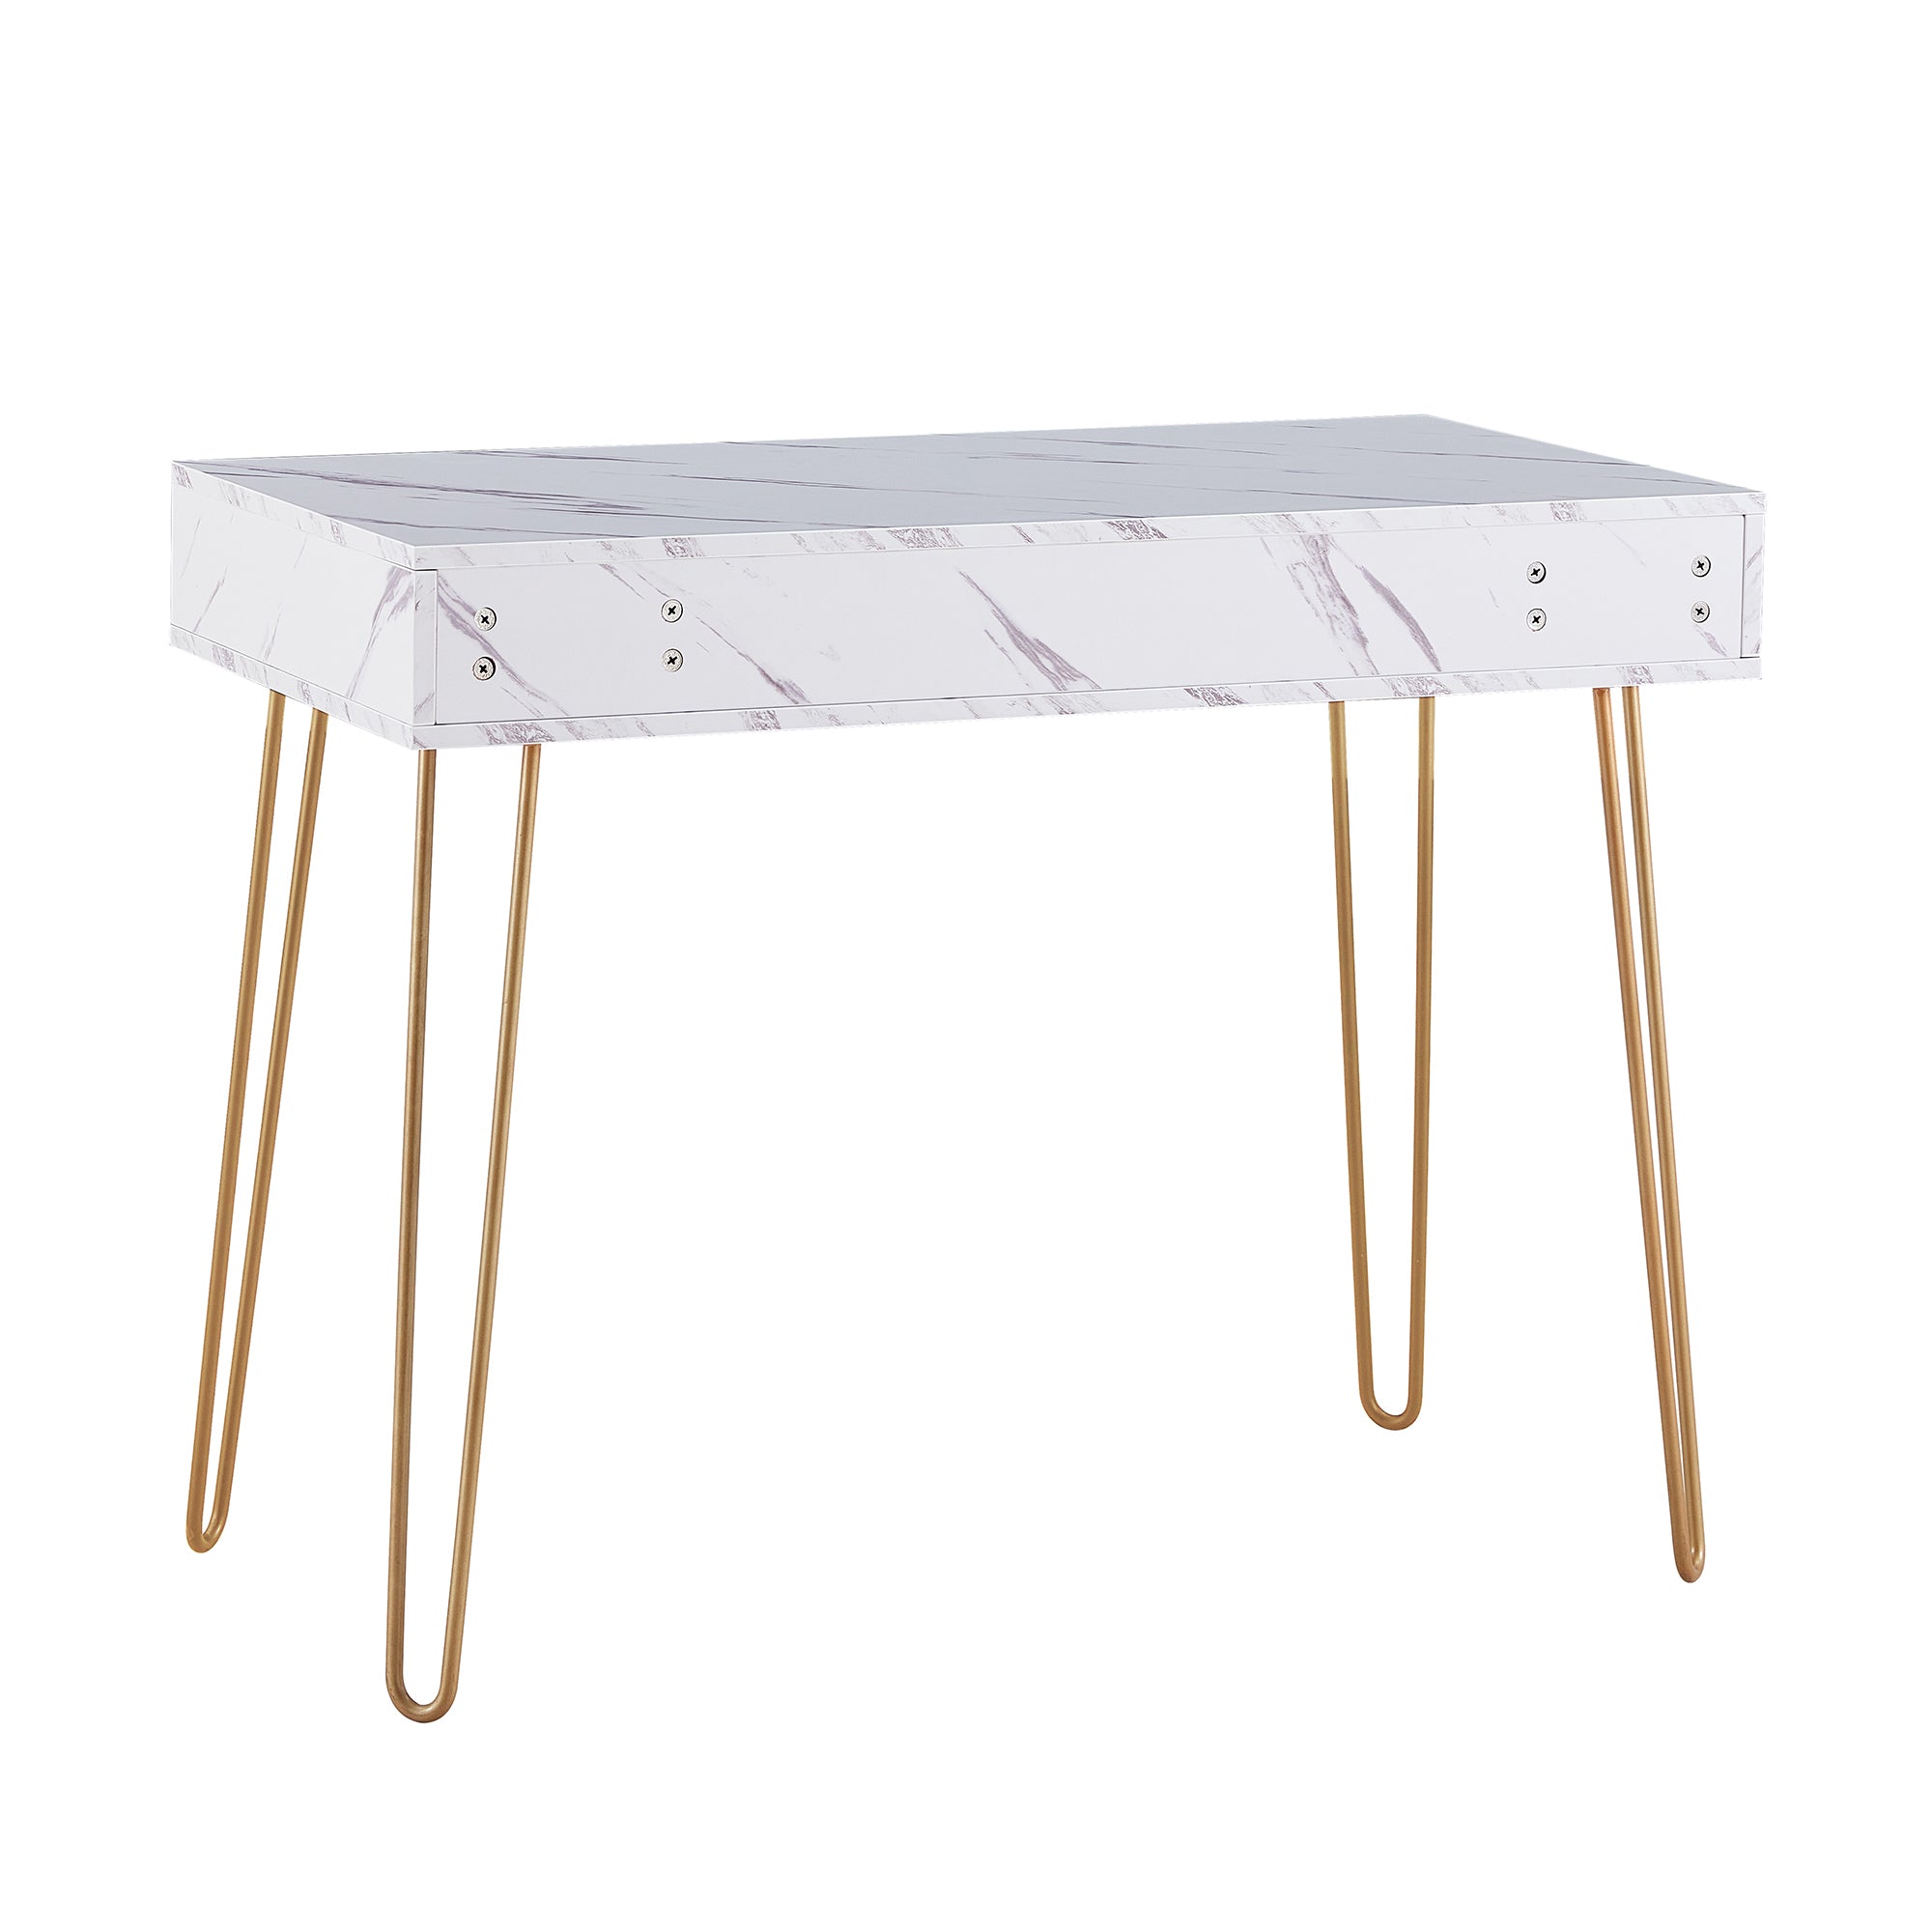 D&N Table nail art table writing desk study desk consoles table side end table modern marble MDF top, sturdy glod metal legs for bedroom, living room, Kitchen